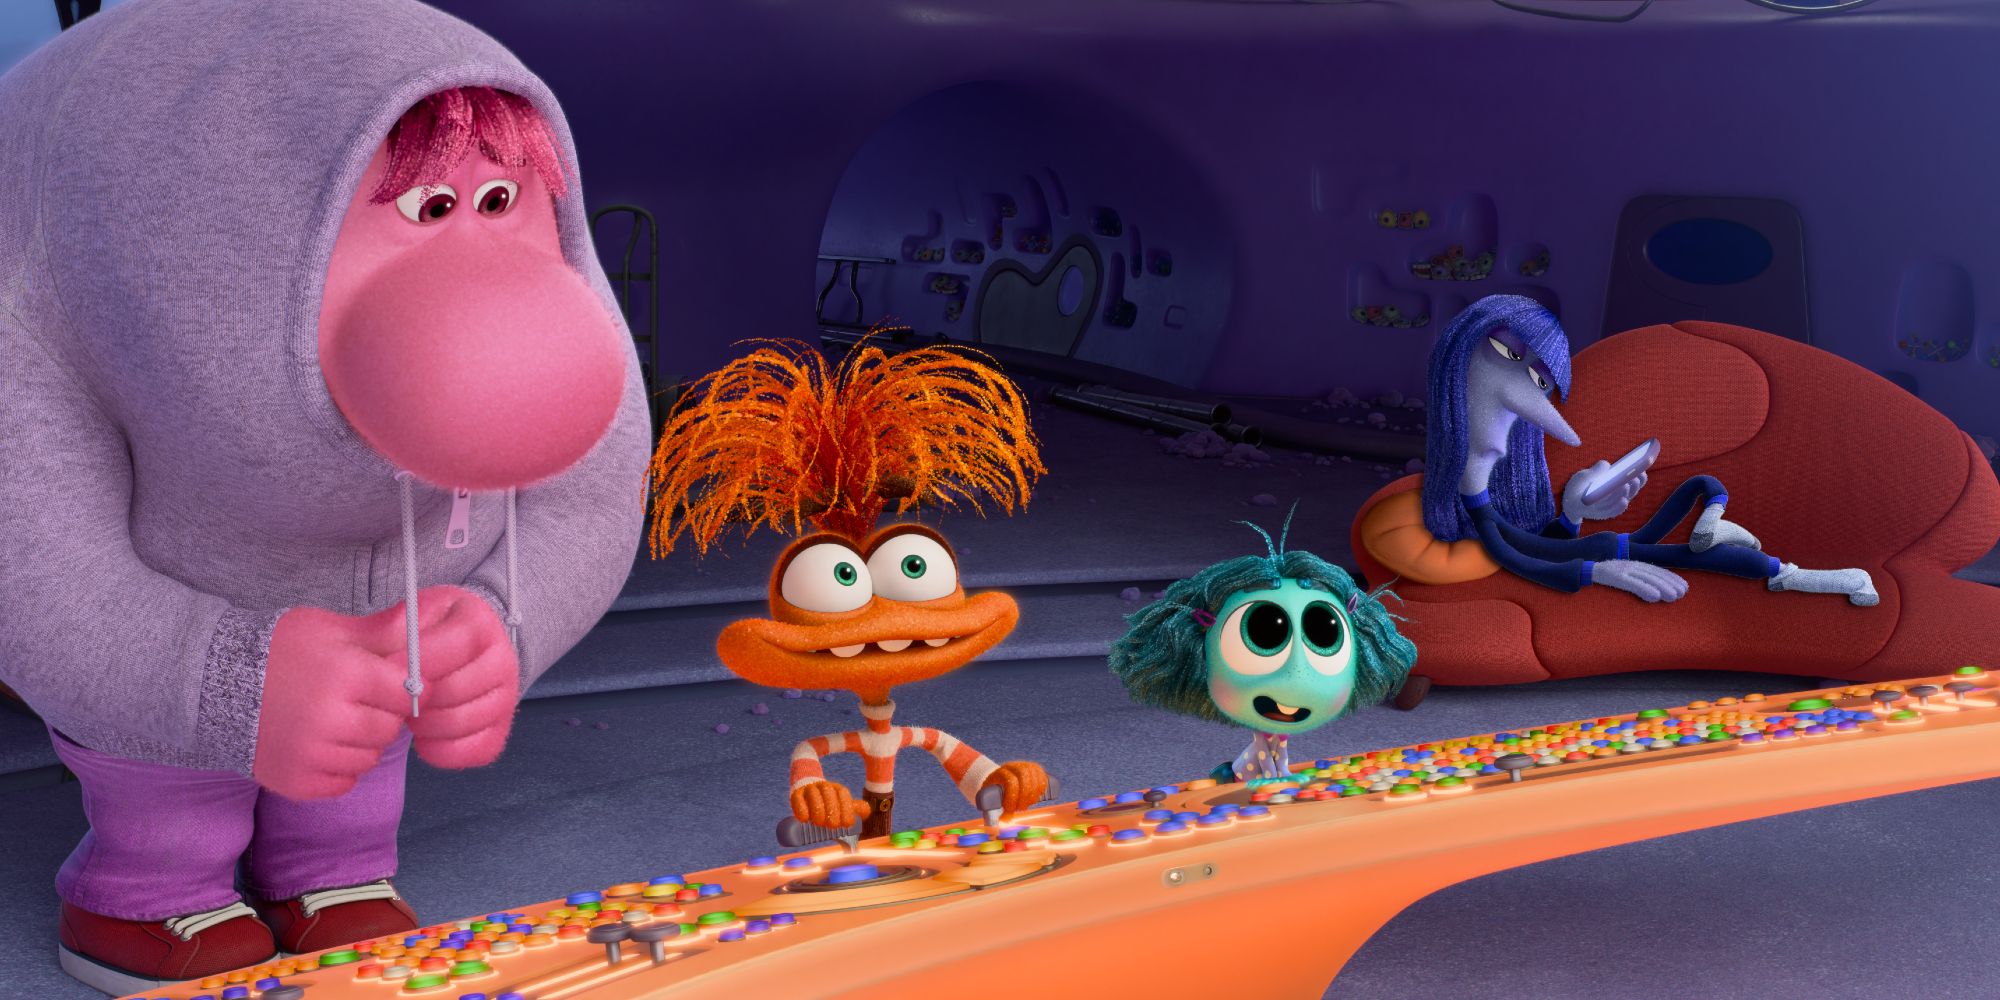 Anxiety, Embarrassment, Envy, and Ennui take control of Riley's control panel in Inside Out 2